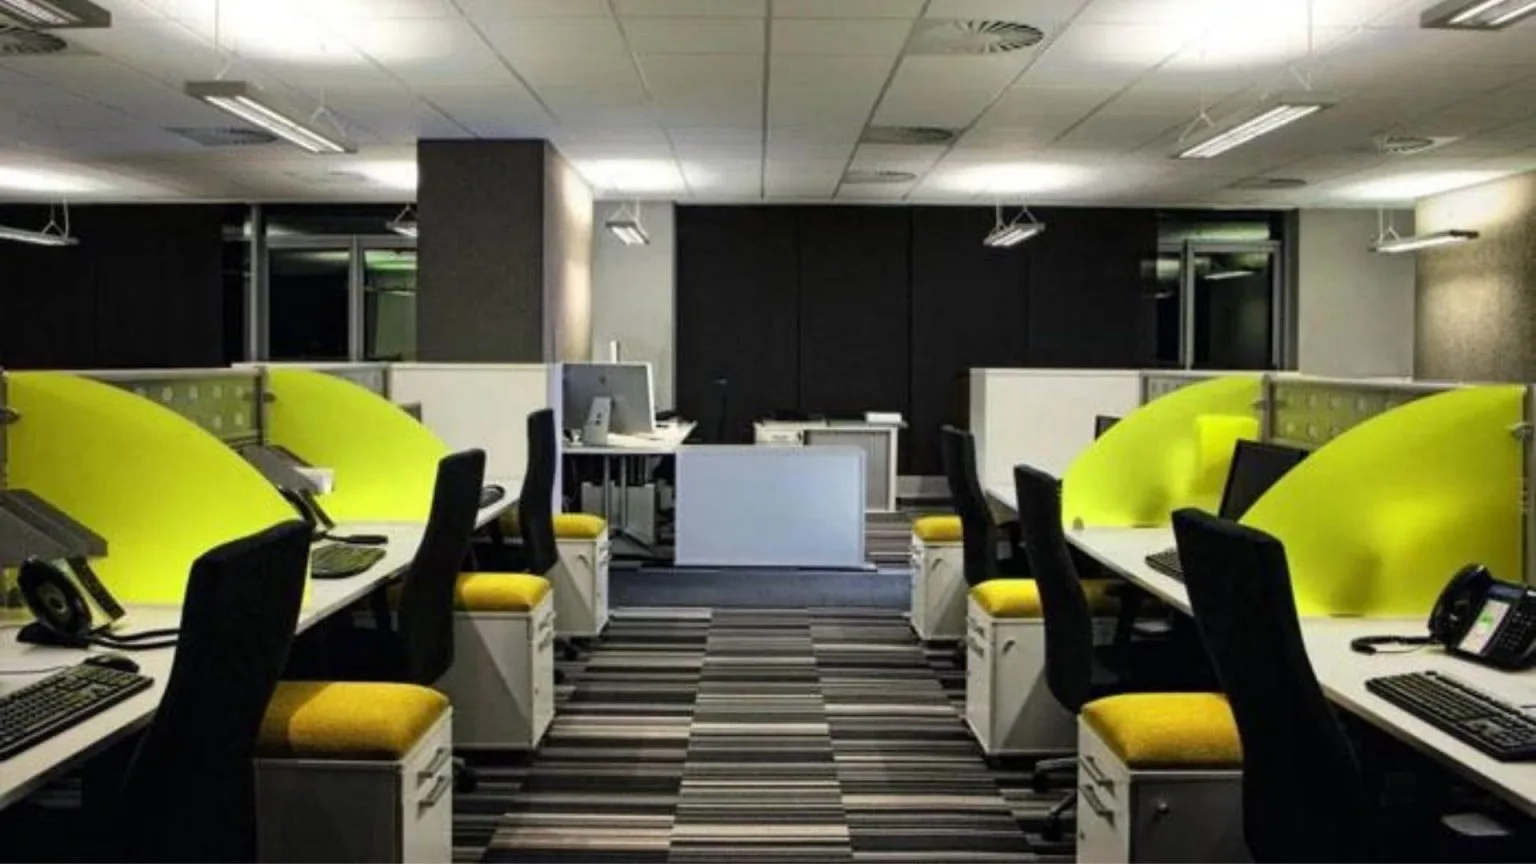 OFFICE FIT OUT